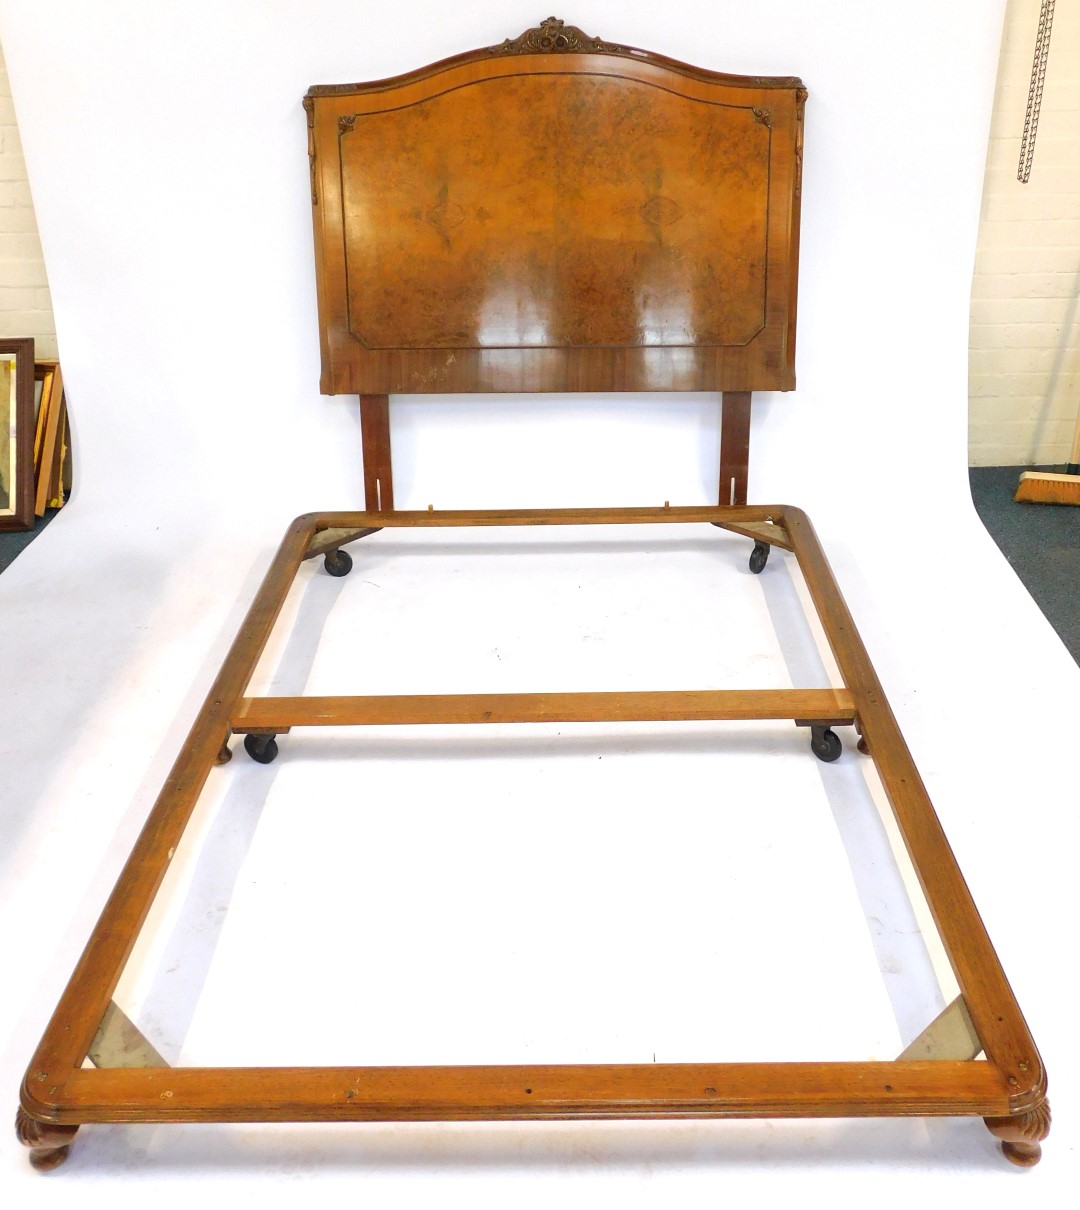 An early 20thC walnut double bed, the headboard with floral and foliate carved crest rail, the - Image 2 of 2